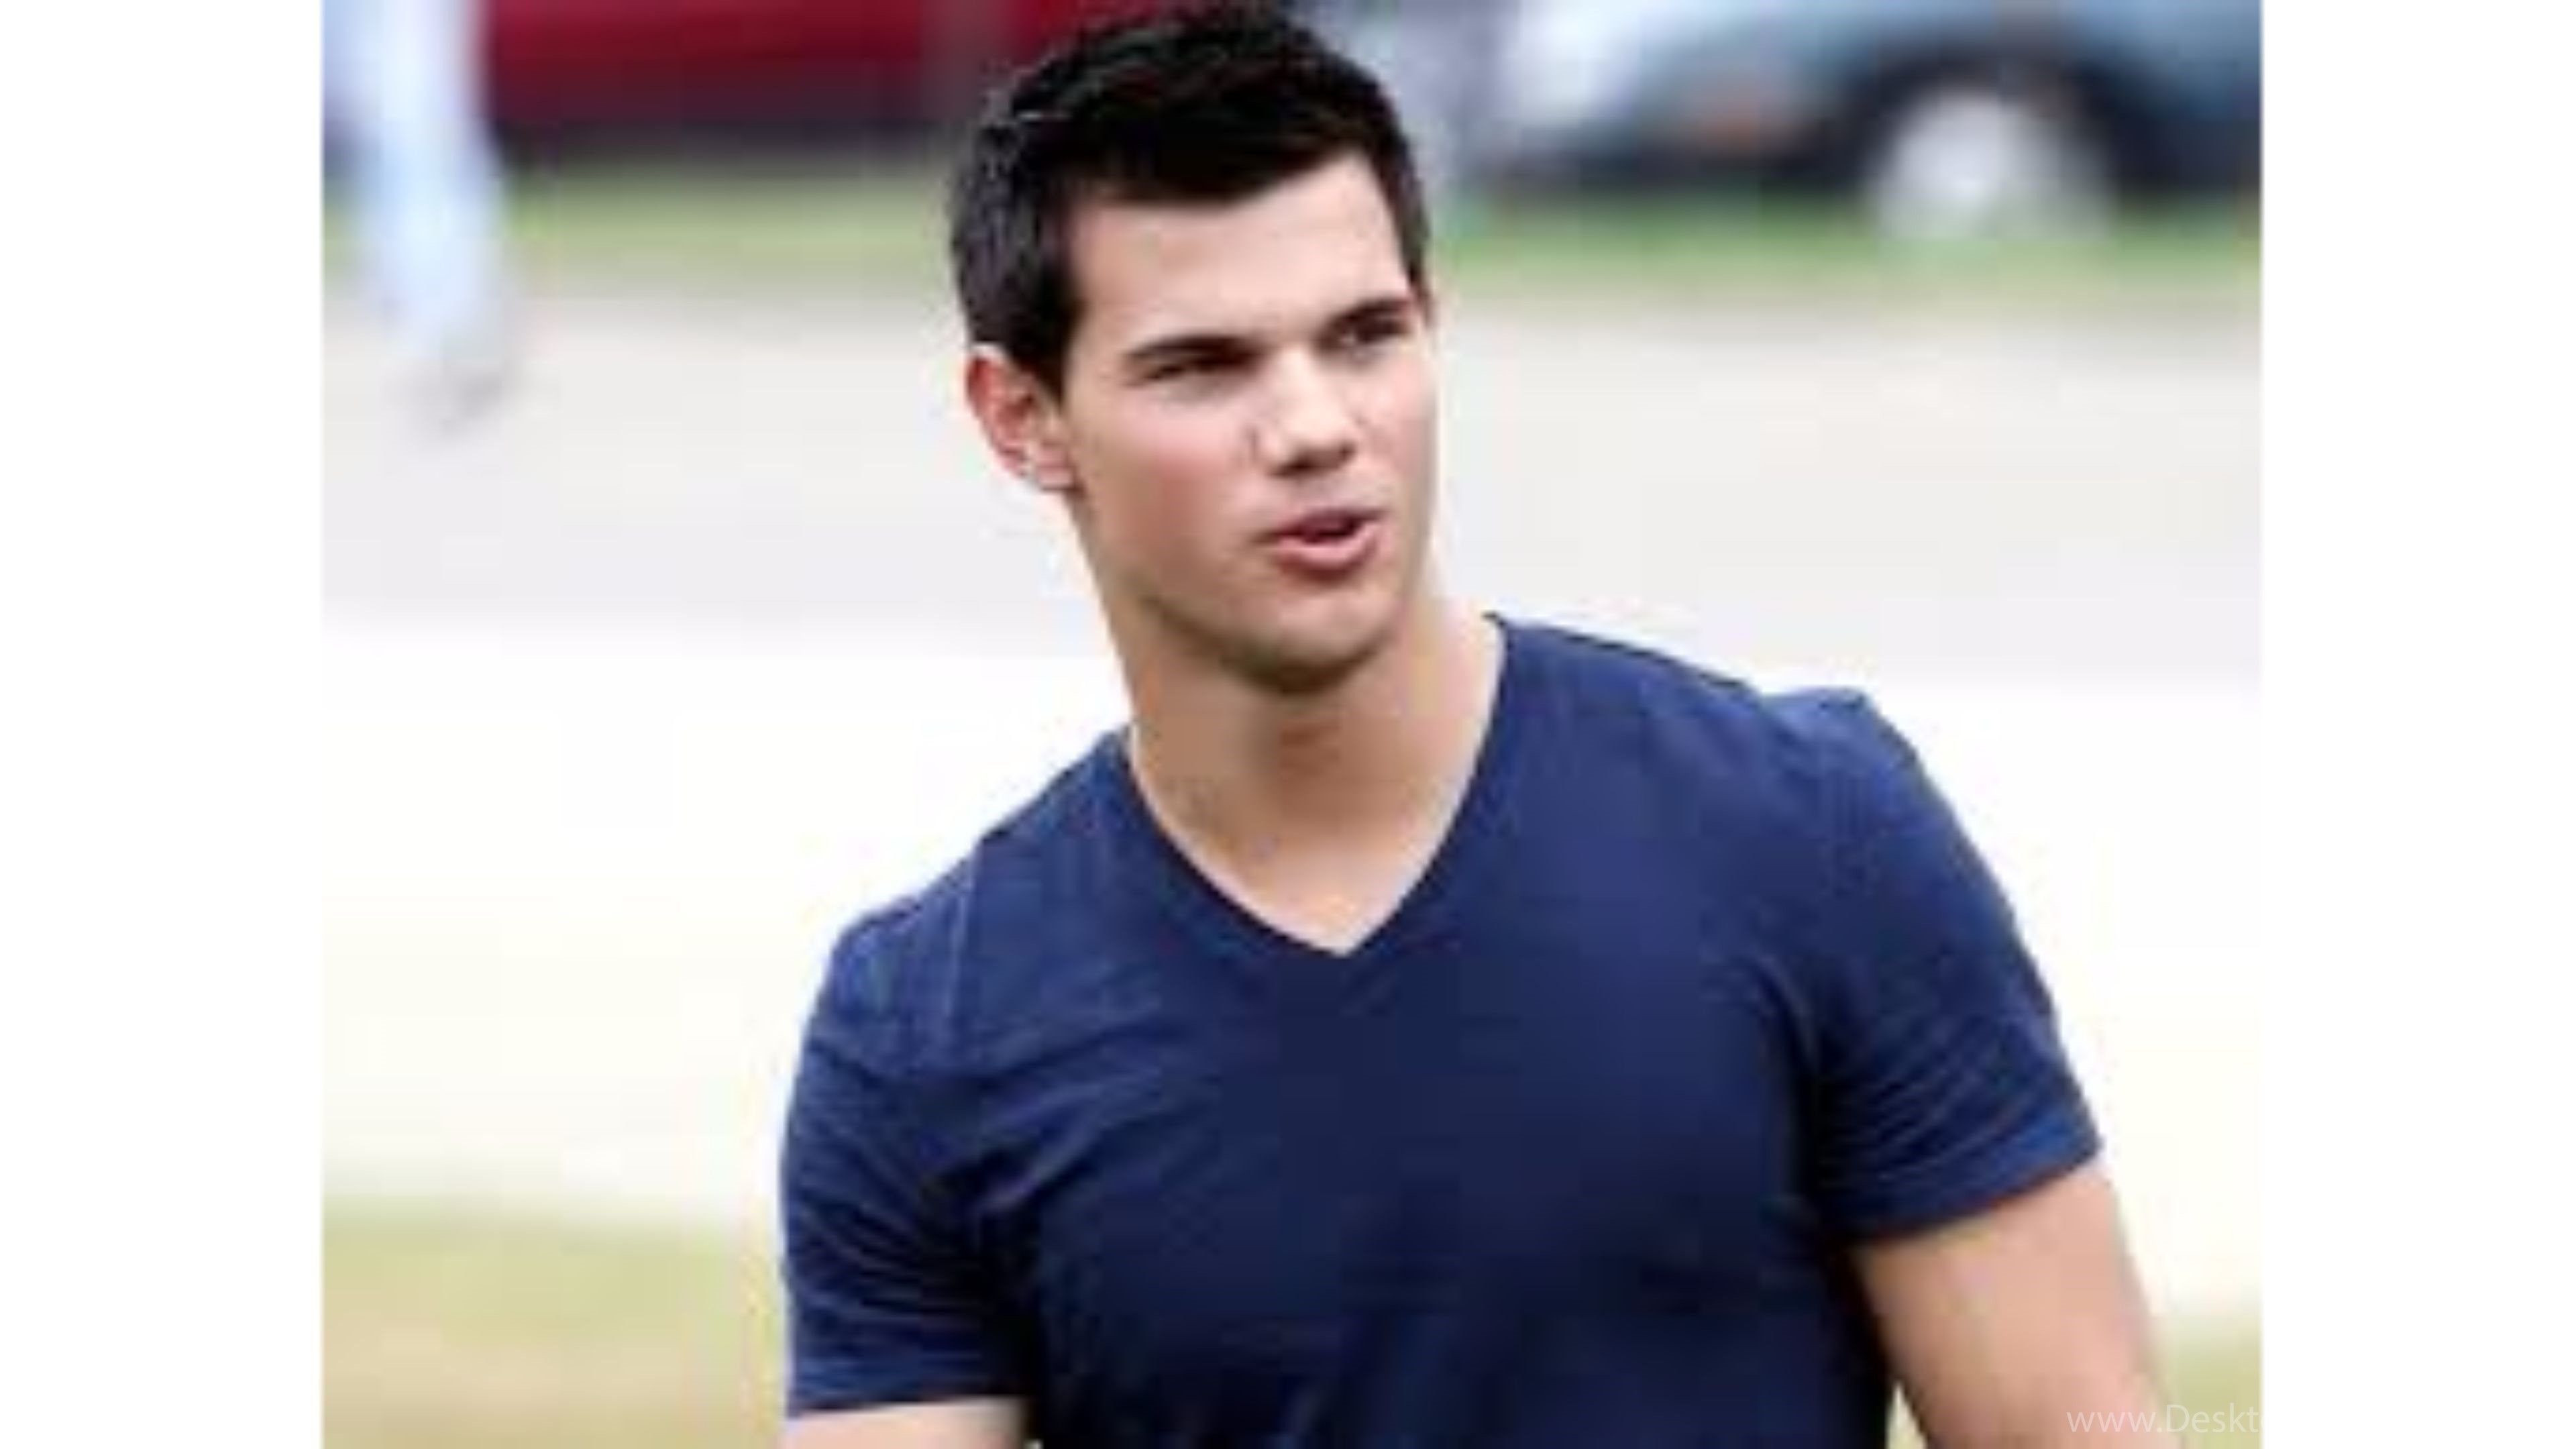 3840x2160  taylor lautner wallpapers for computer, image of taylor lautner  wallpapers for computer, pictures on taylor lautner wallpapers for computer